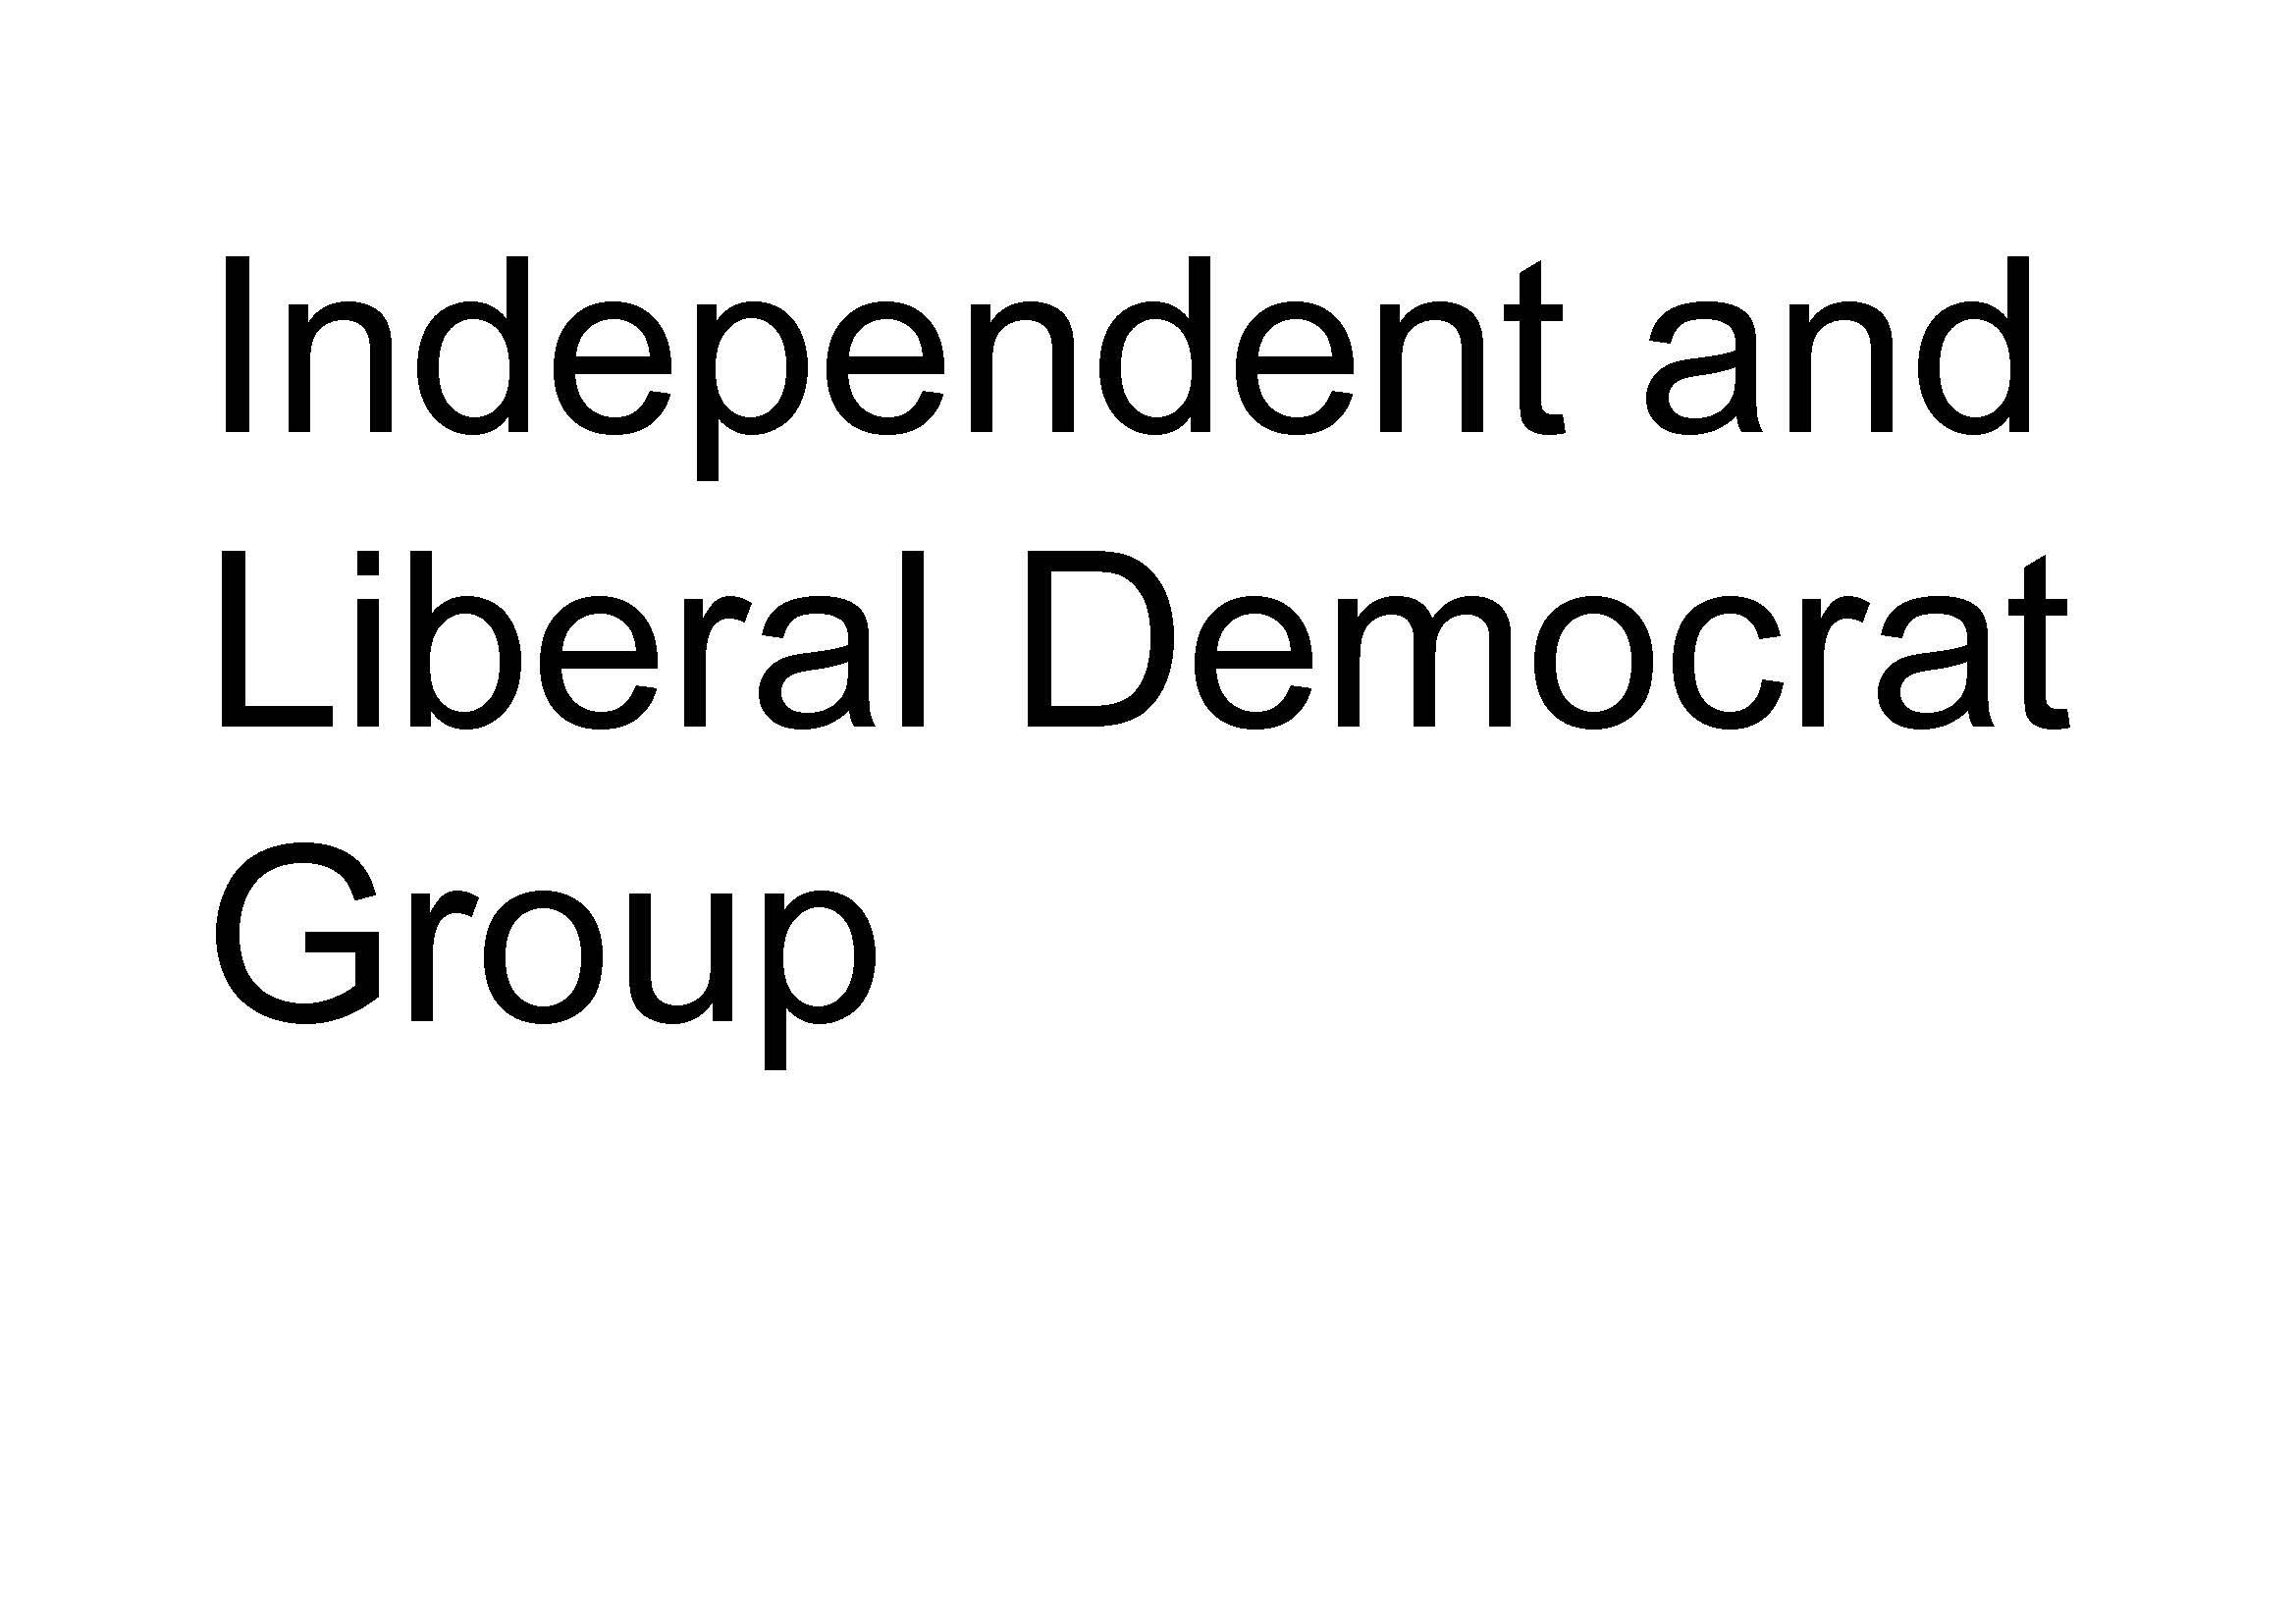 Independent and Liberal Democrat Group (logo)